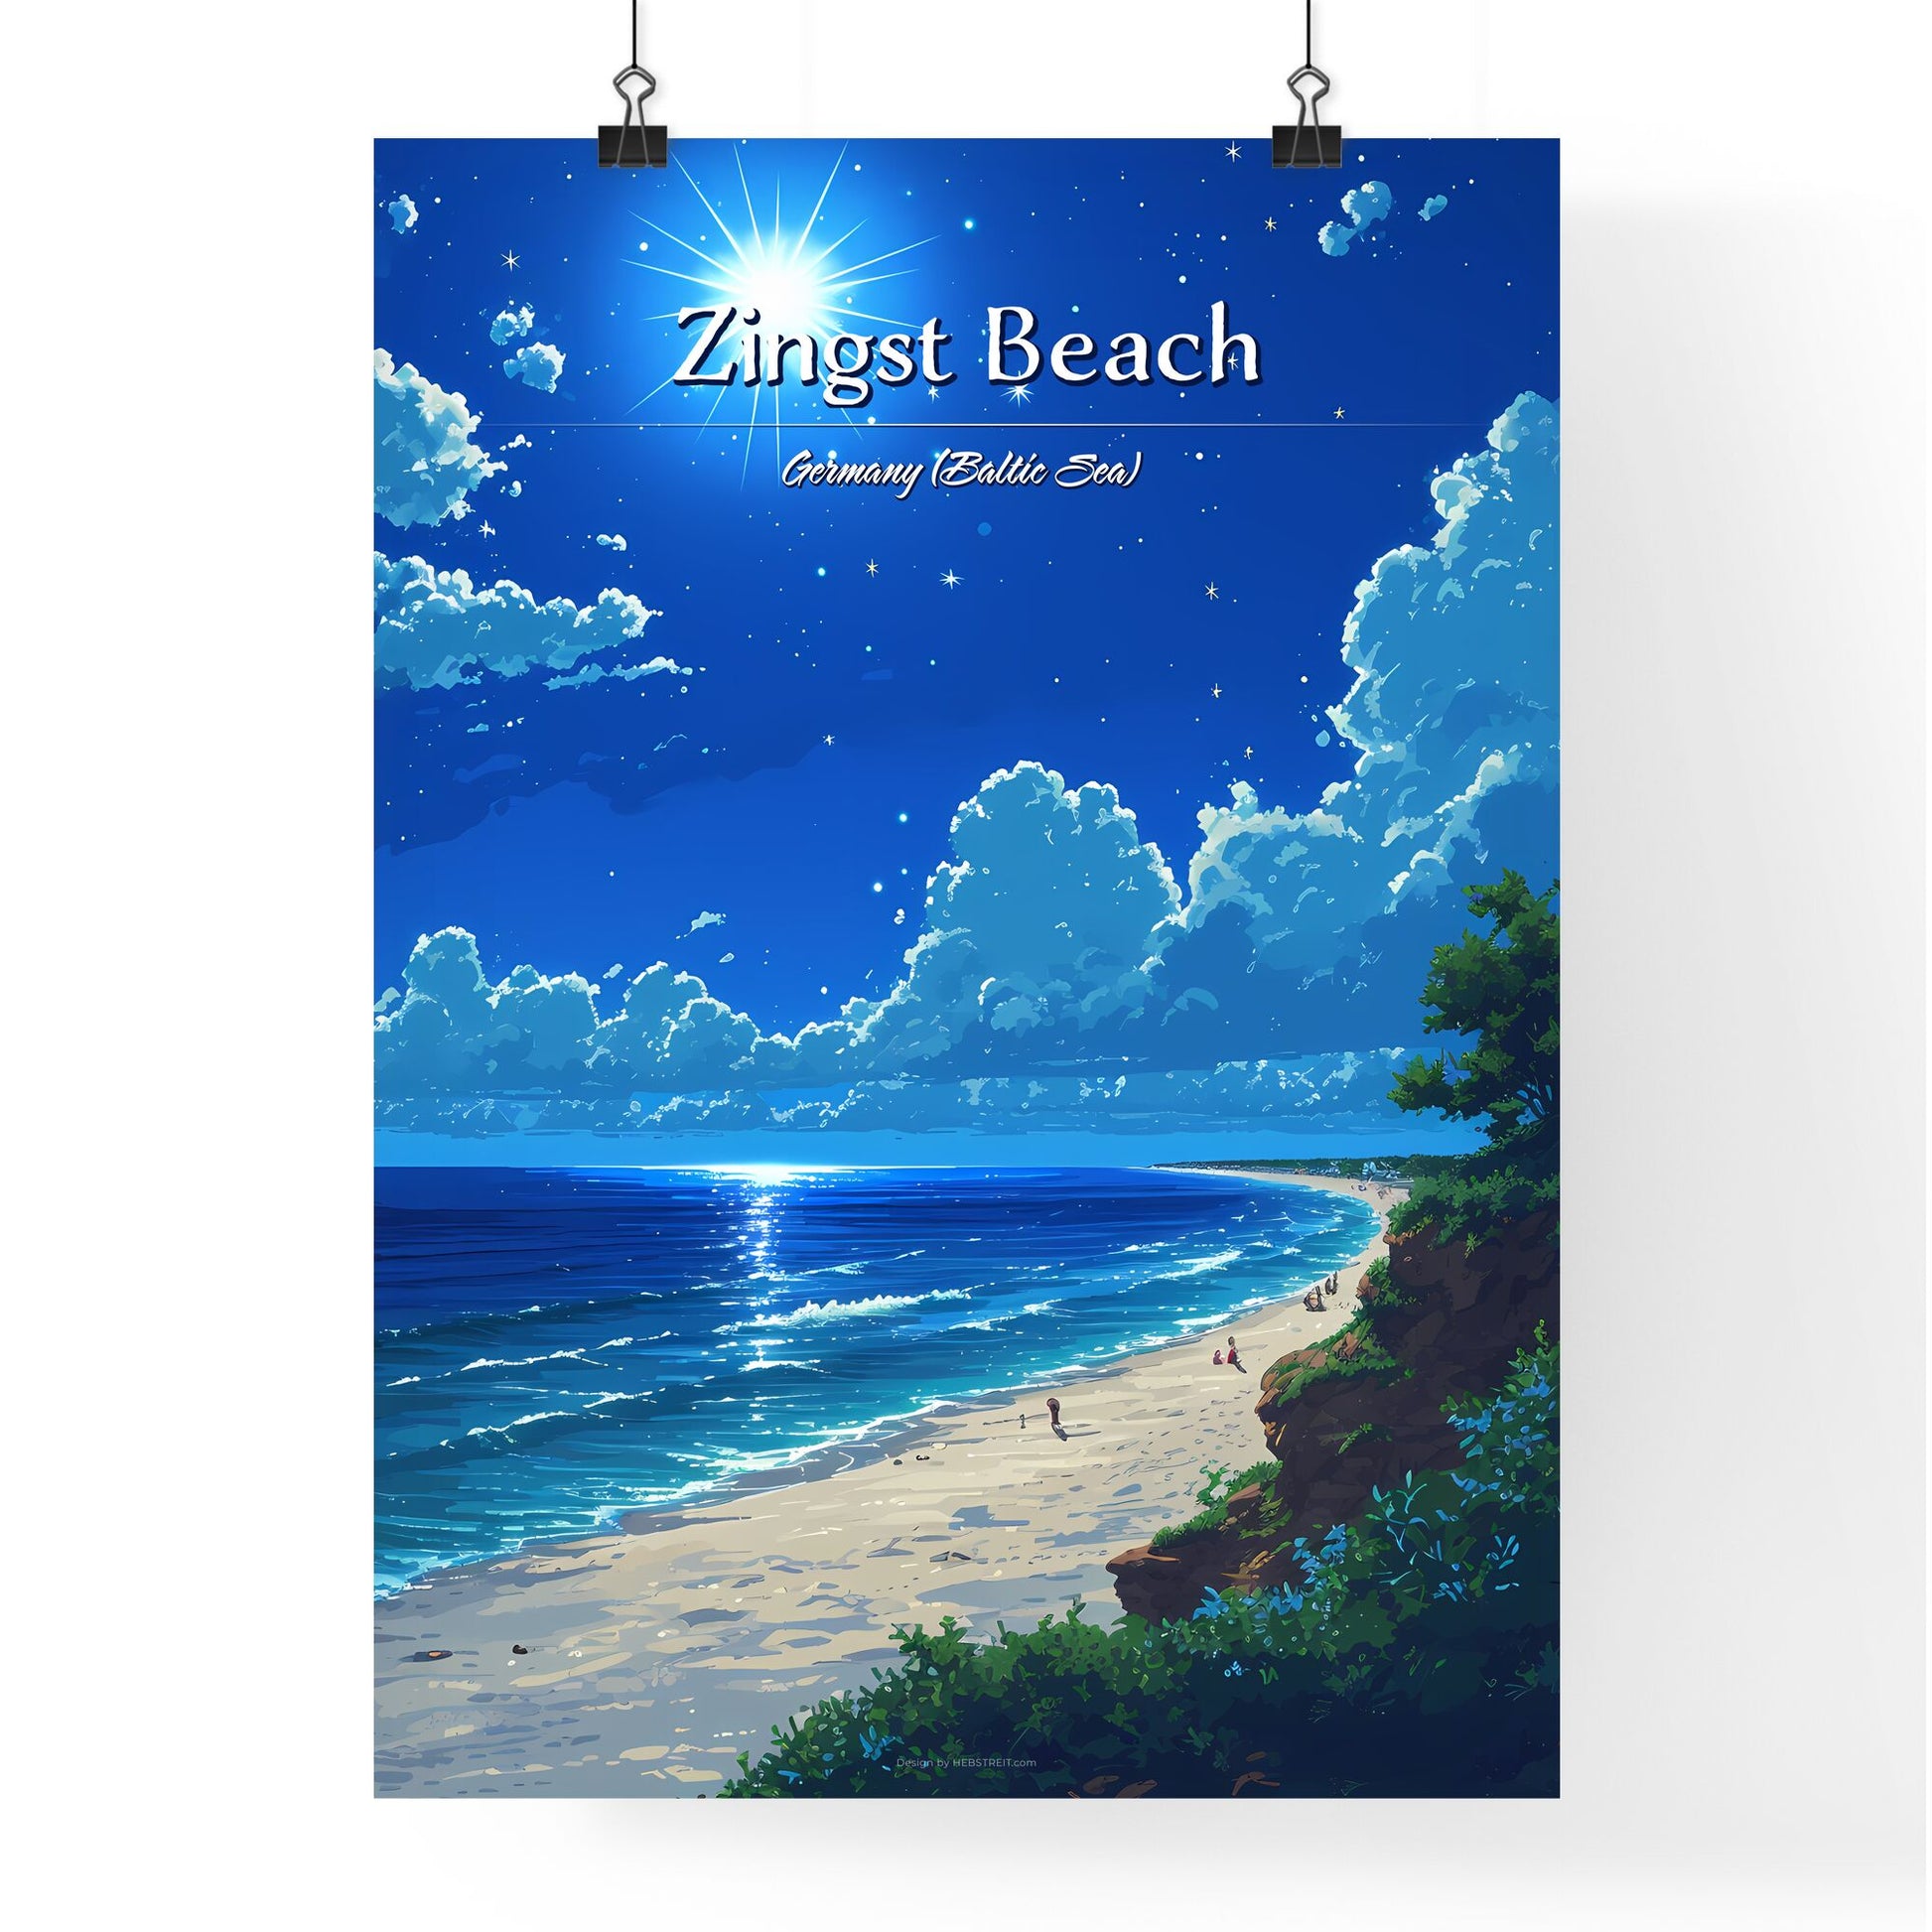 Zingst Beach, Germany (Baltic Sea) - Art print of a beach with trees and a bright sun Default Title